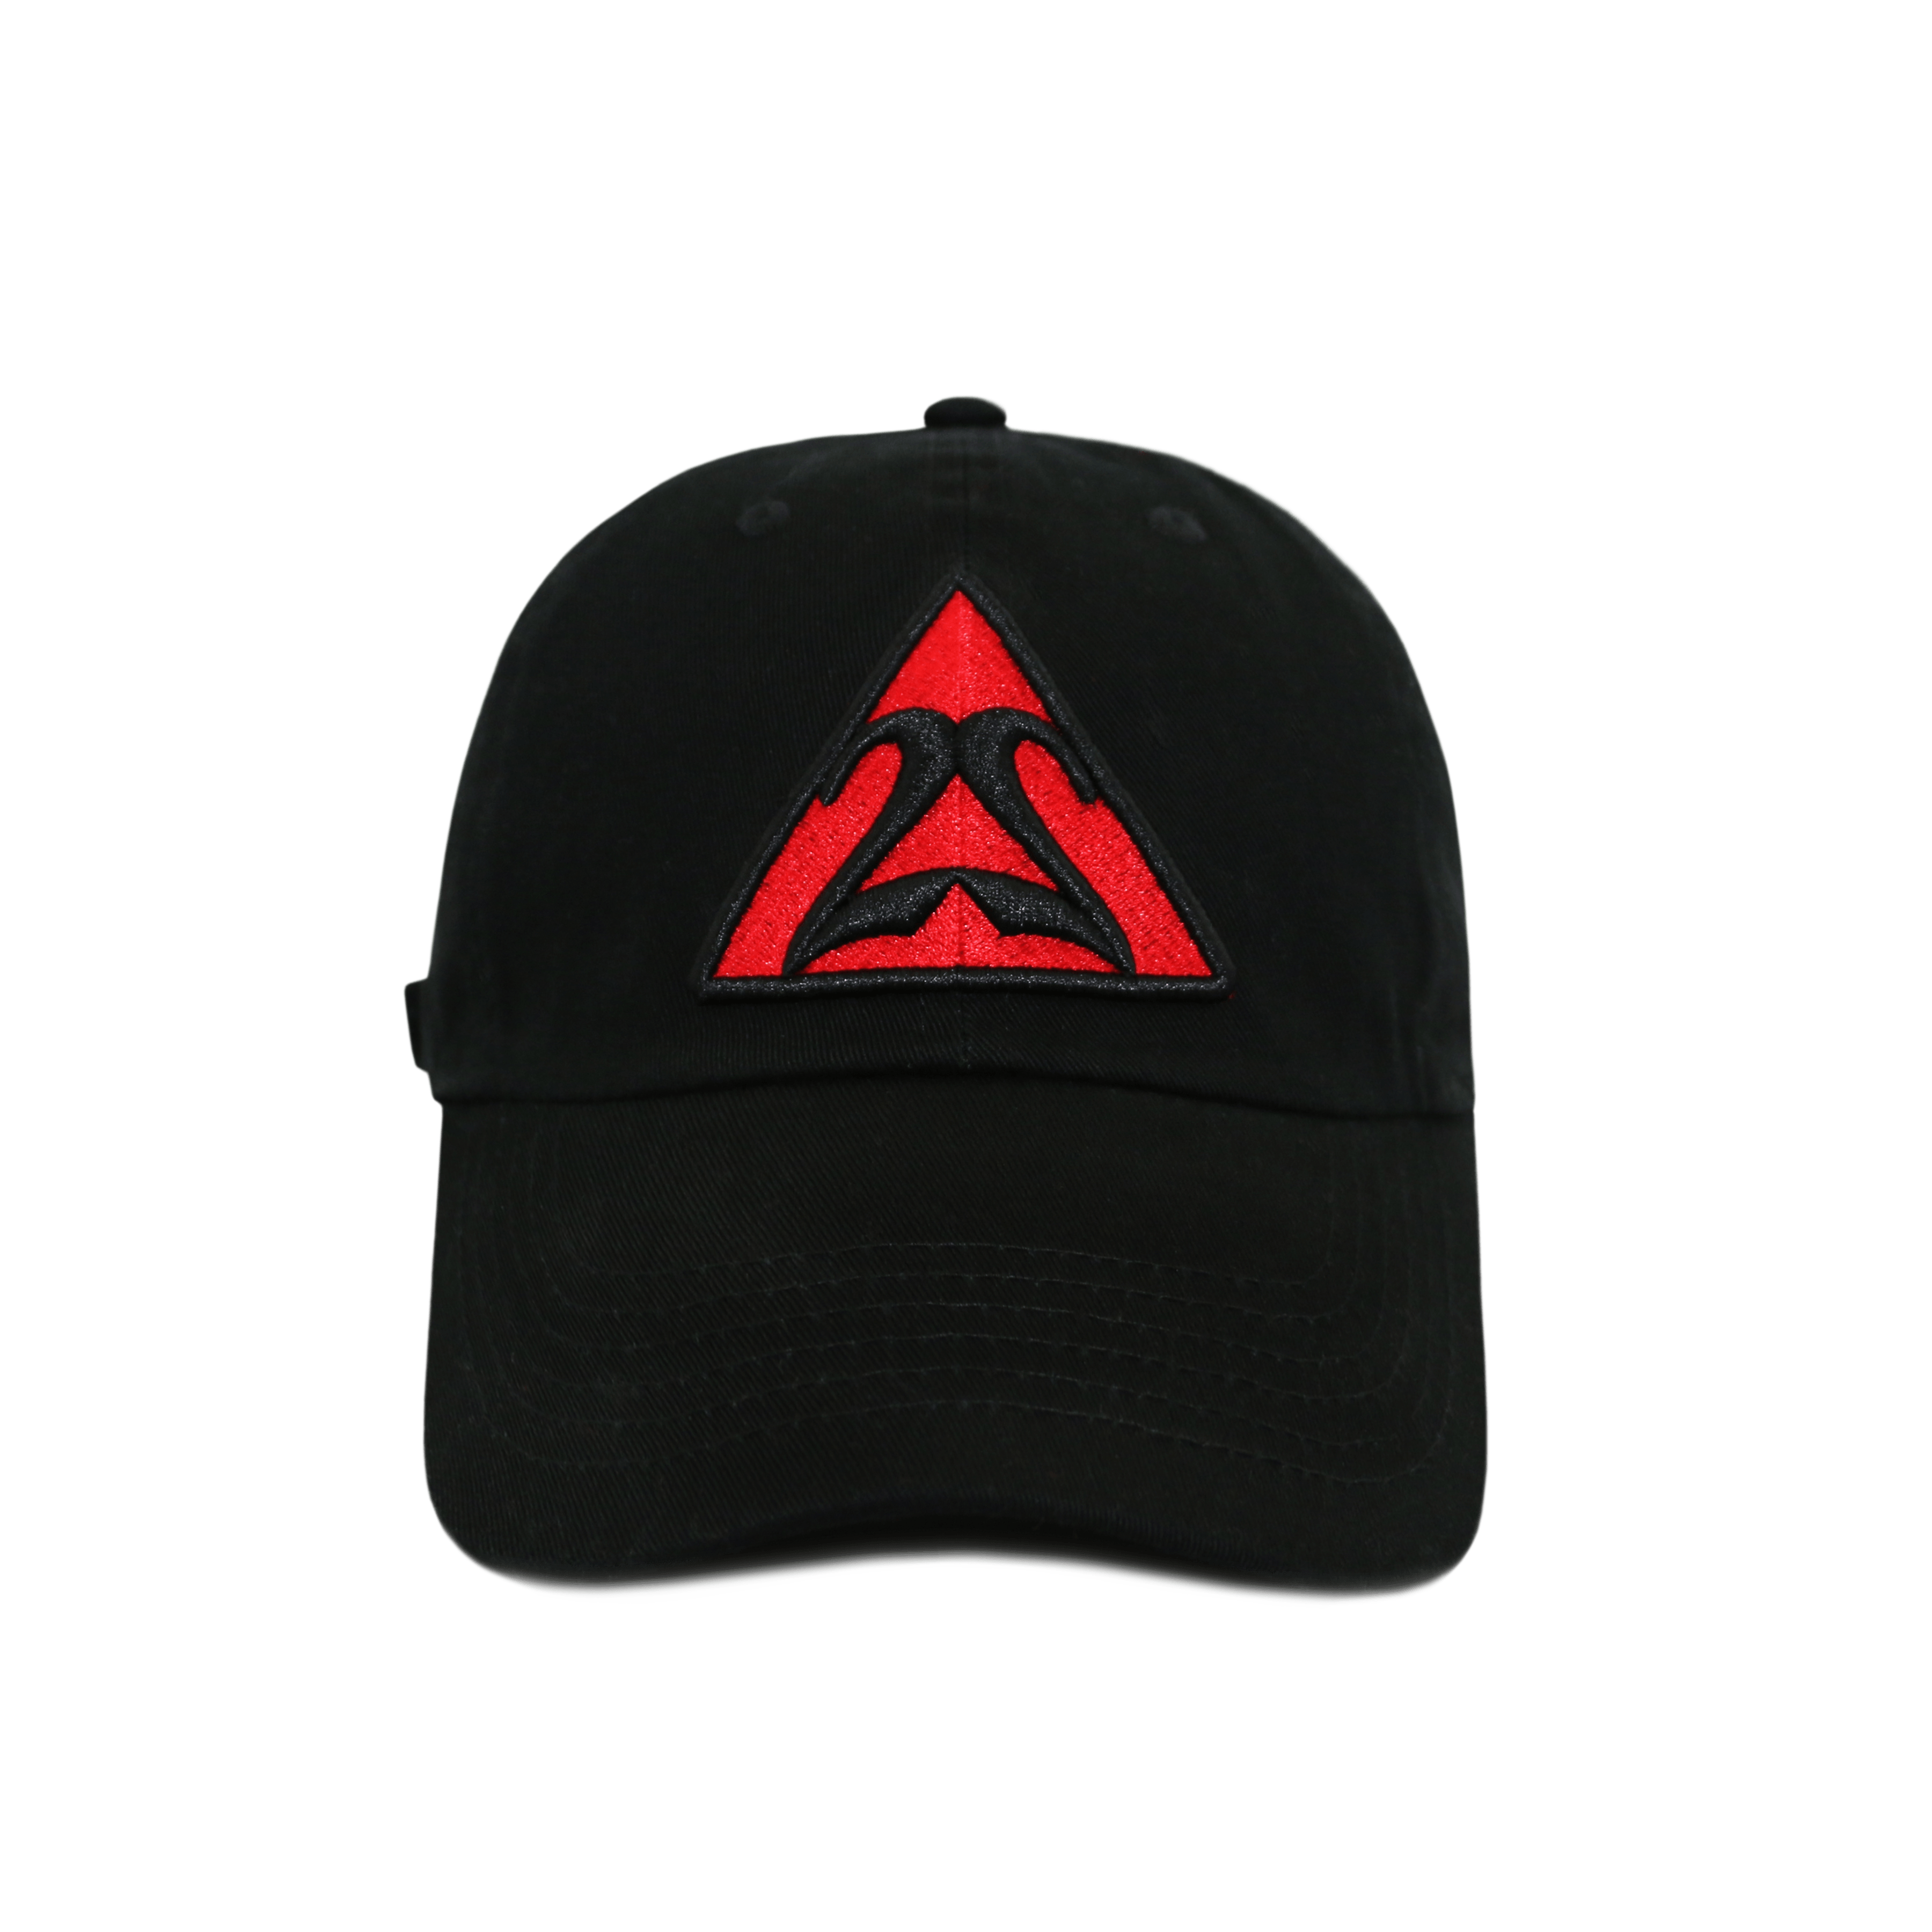 Grey and Red Triangle Logo - Hats Archives - 2 Strong Fashion